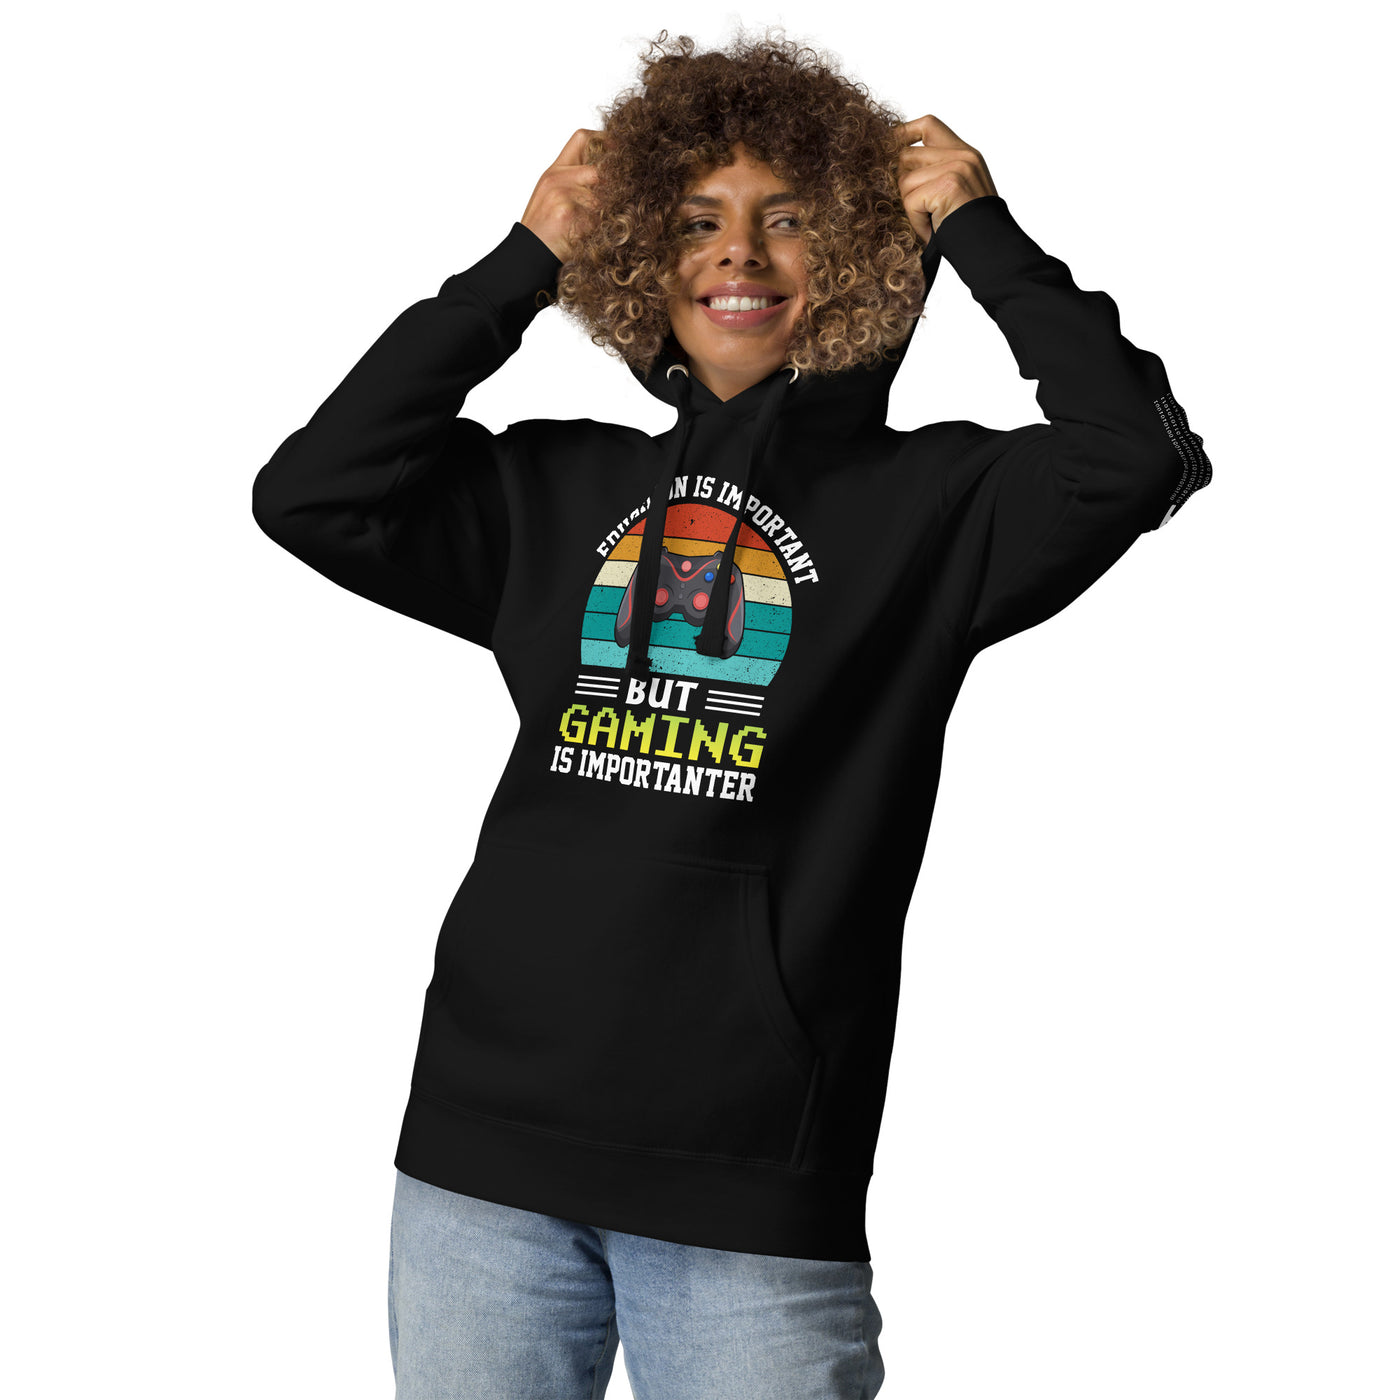 Education is Important, but Gaming is importanter - Unisex Hoodie